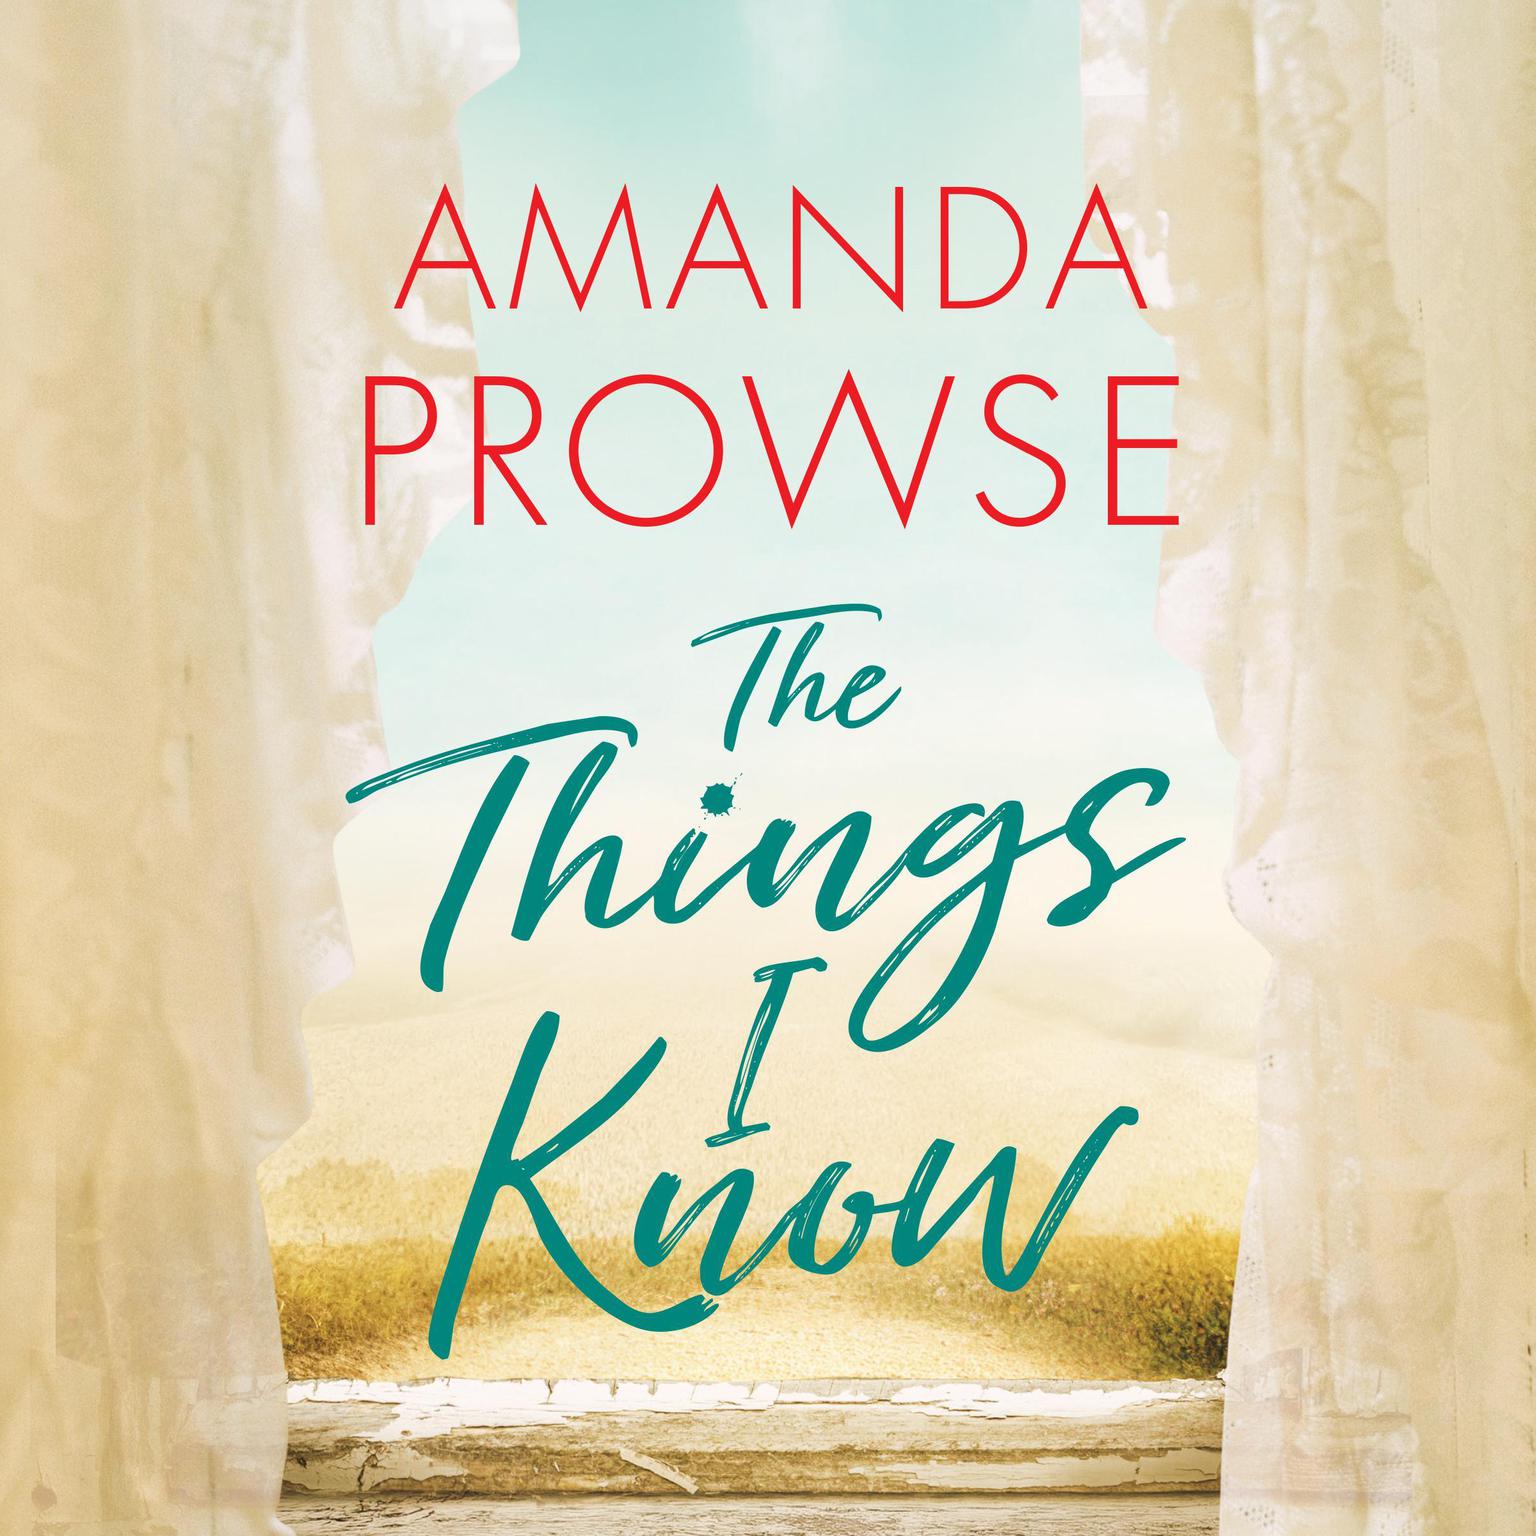 The Things I Know Audiobook, by Amanda Prowse